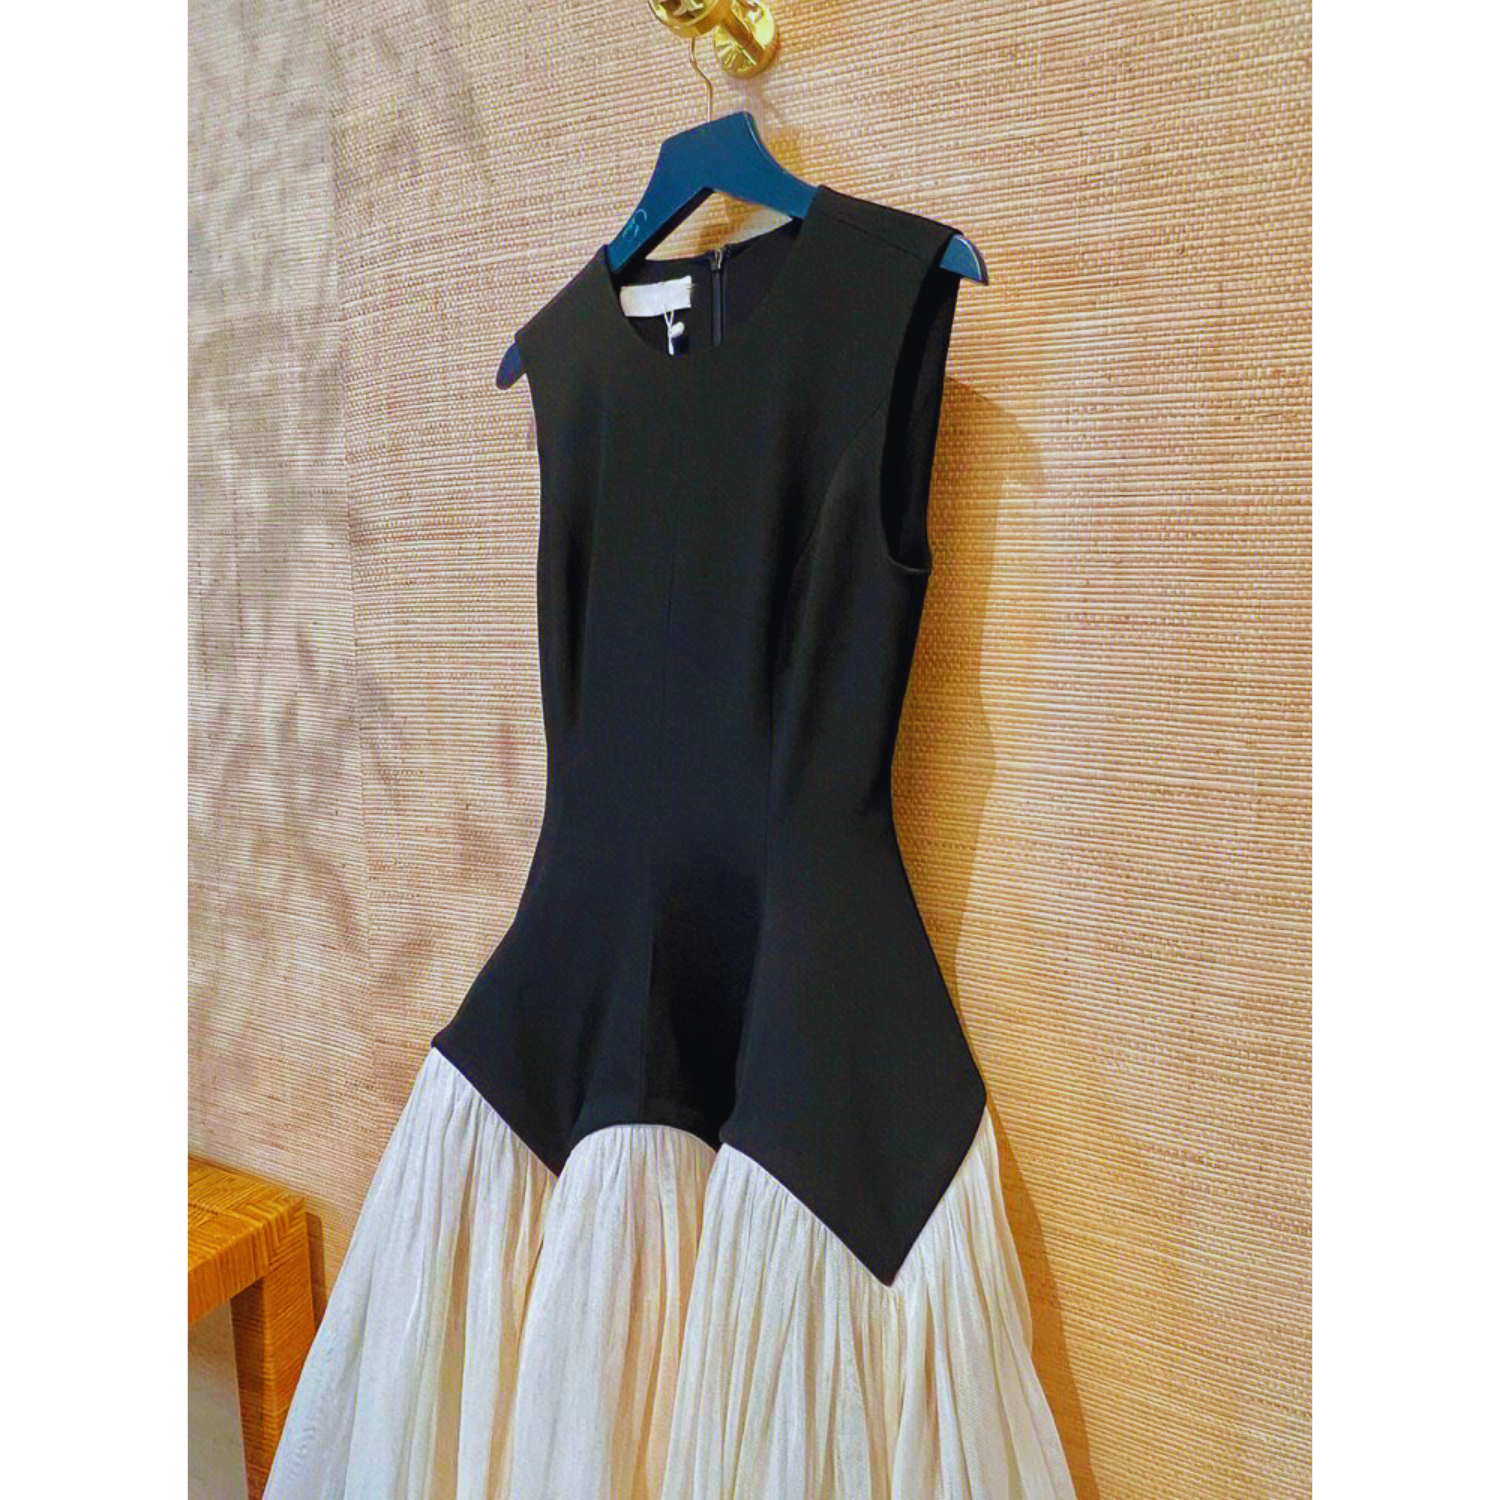 Black and Cream Sleeveless Dress with a Tulle Skirt